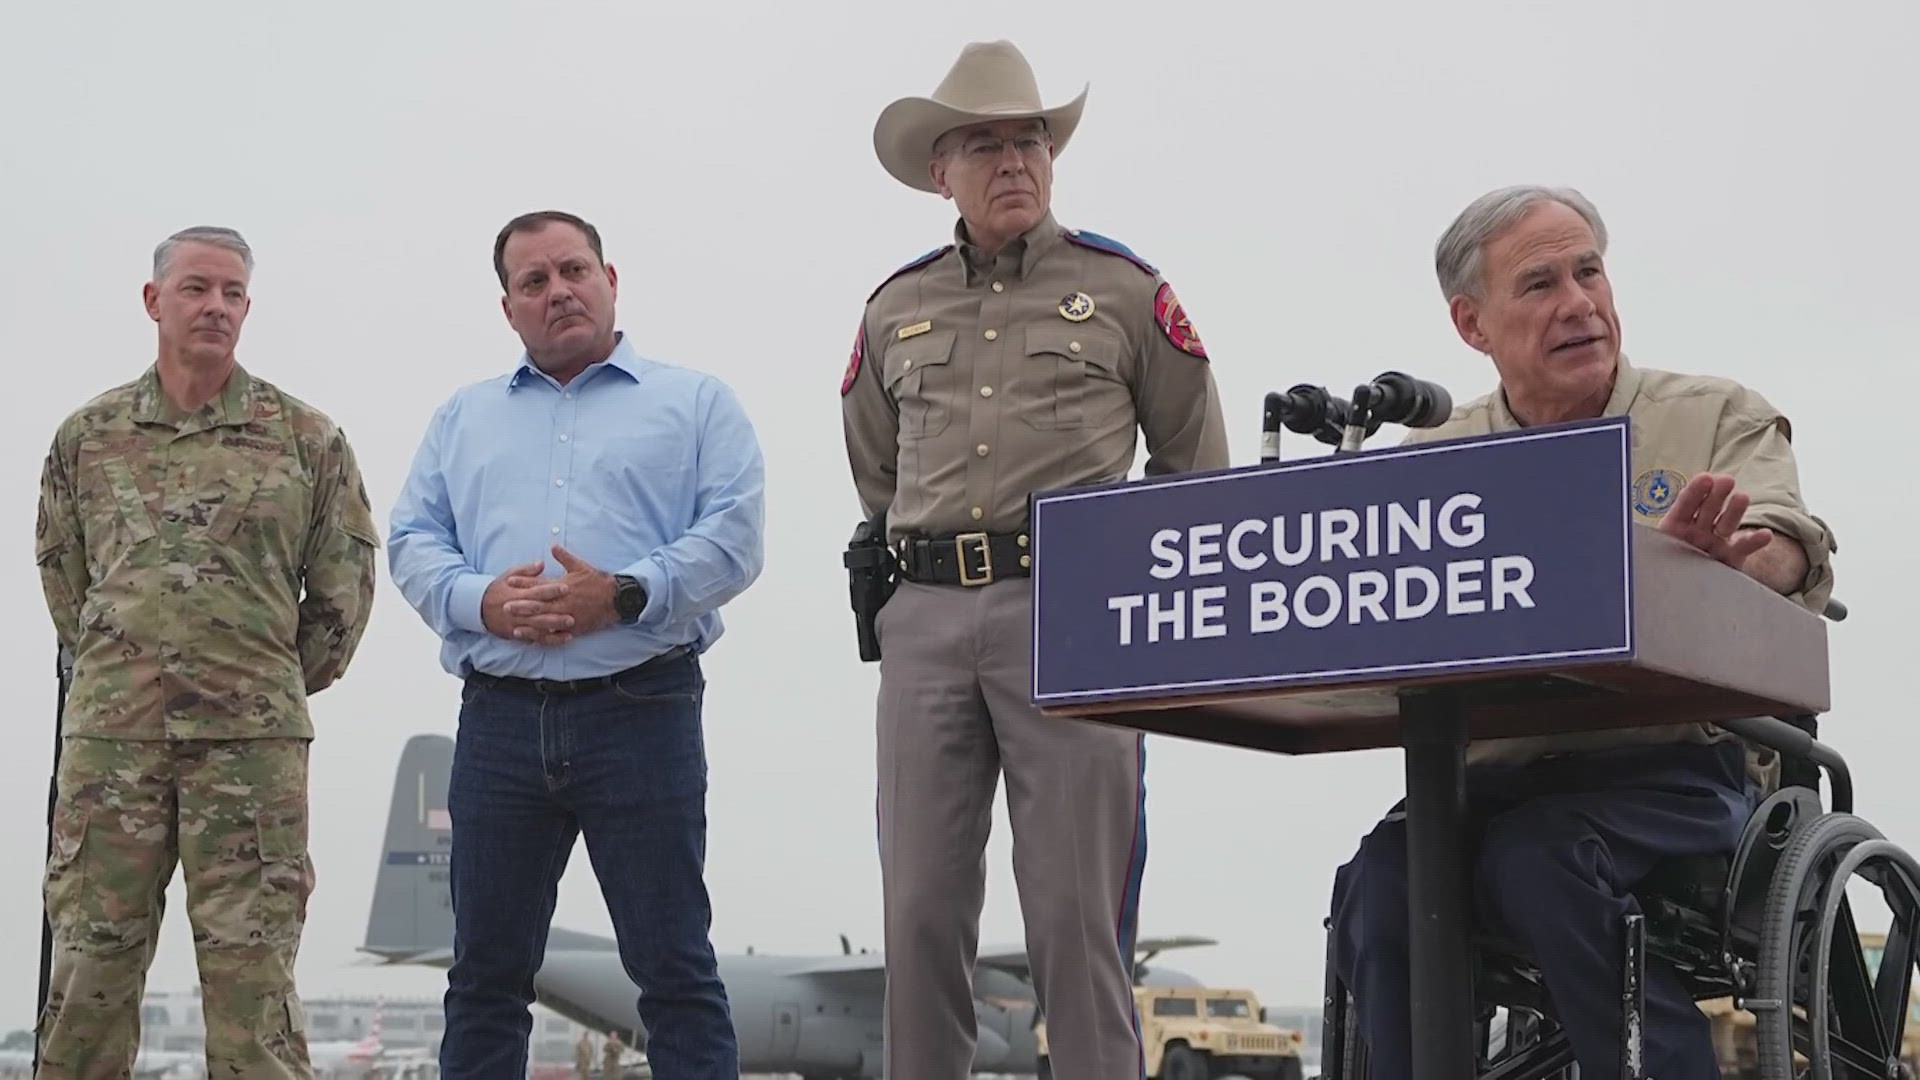 Although border encounters have fallen since Title 42 ended Thursday, Texas’ top Republican asks for “all available law enforcement personnel and resources.”